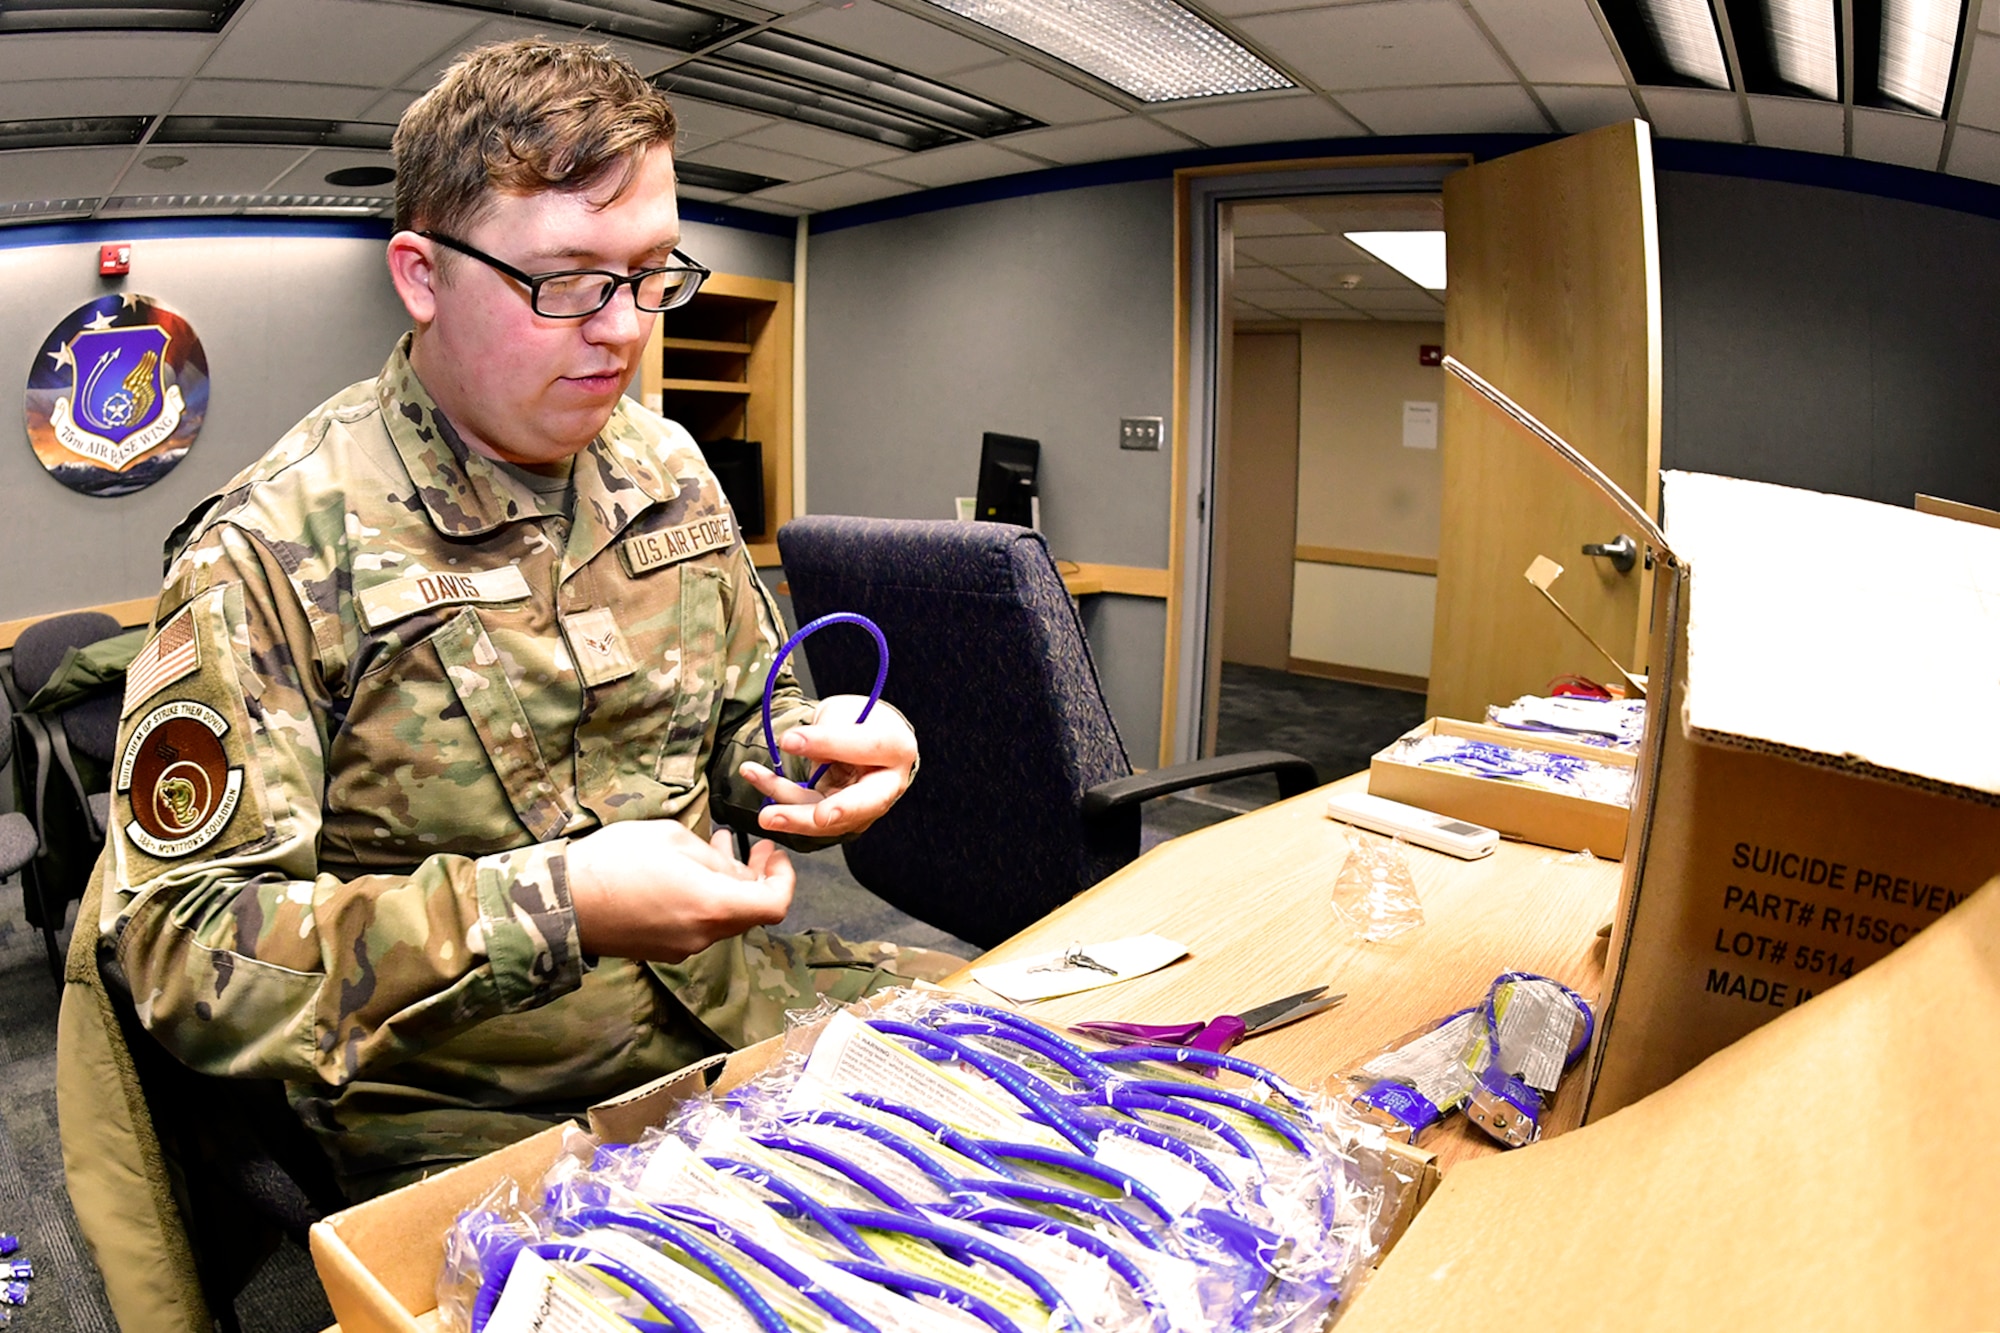 Airman 1st Class Josiah Davis, 338th Munitions Squadron, volunteers to prepare suicide prevention cable locks for distribution Feb. 7, 2023, at Hill Air Force Base, Utah. These locks were provided by the Headquarters Air Force Suicide Prevention Program and are known as a time-based prevention tool, designed to delay access to firearms and medicine, for those contemplating suicide during an emotionally charged moment. (U.S. Air Force photo by Todd Cromar)